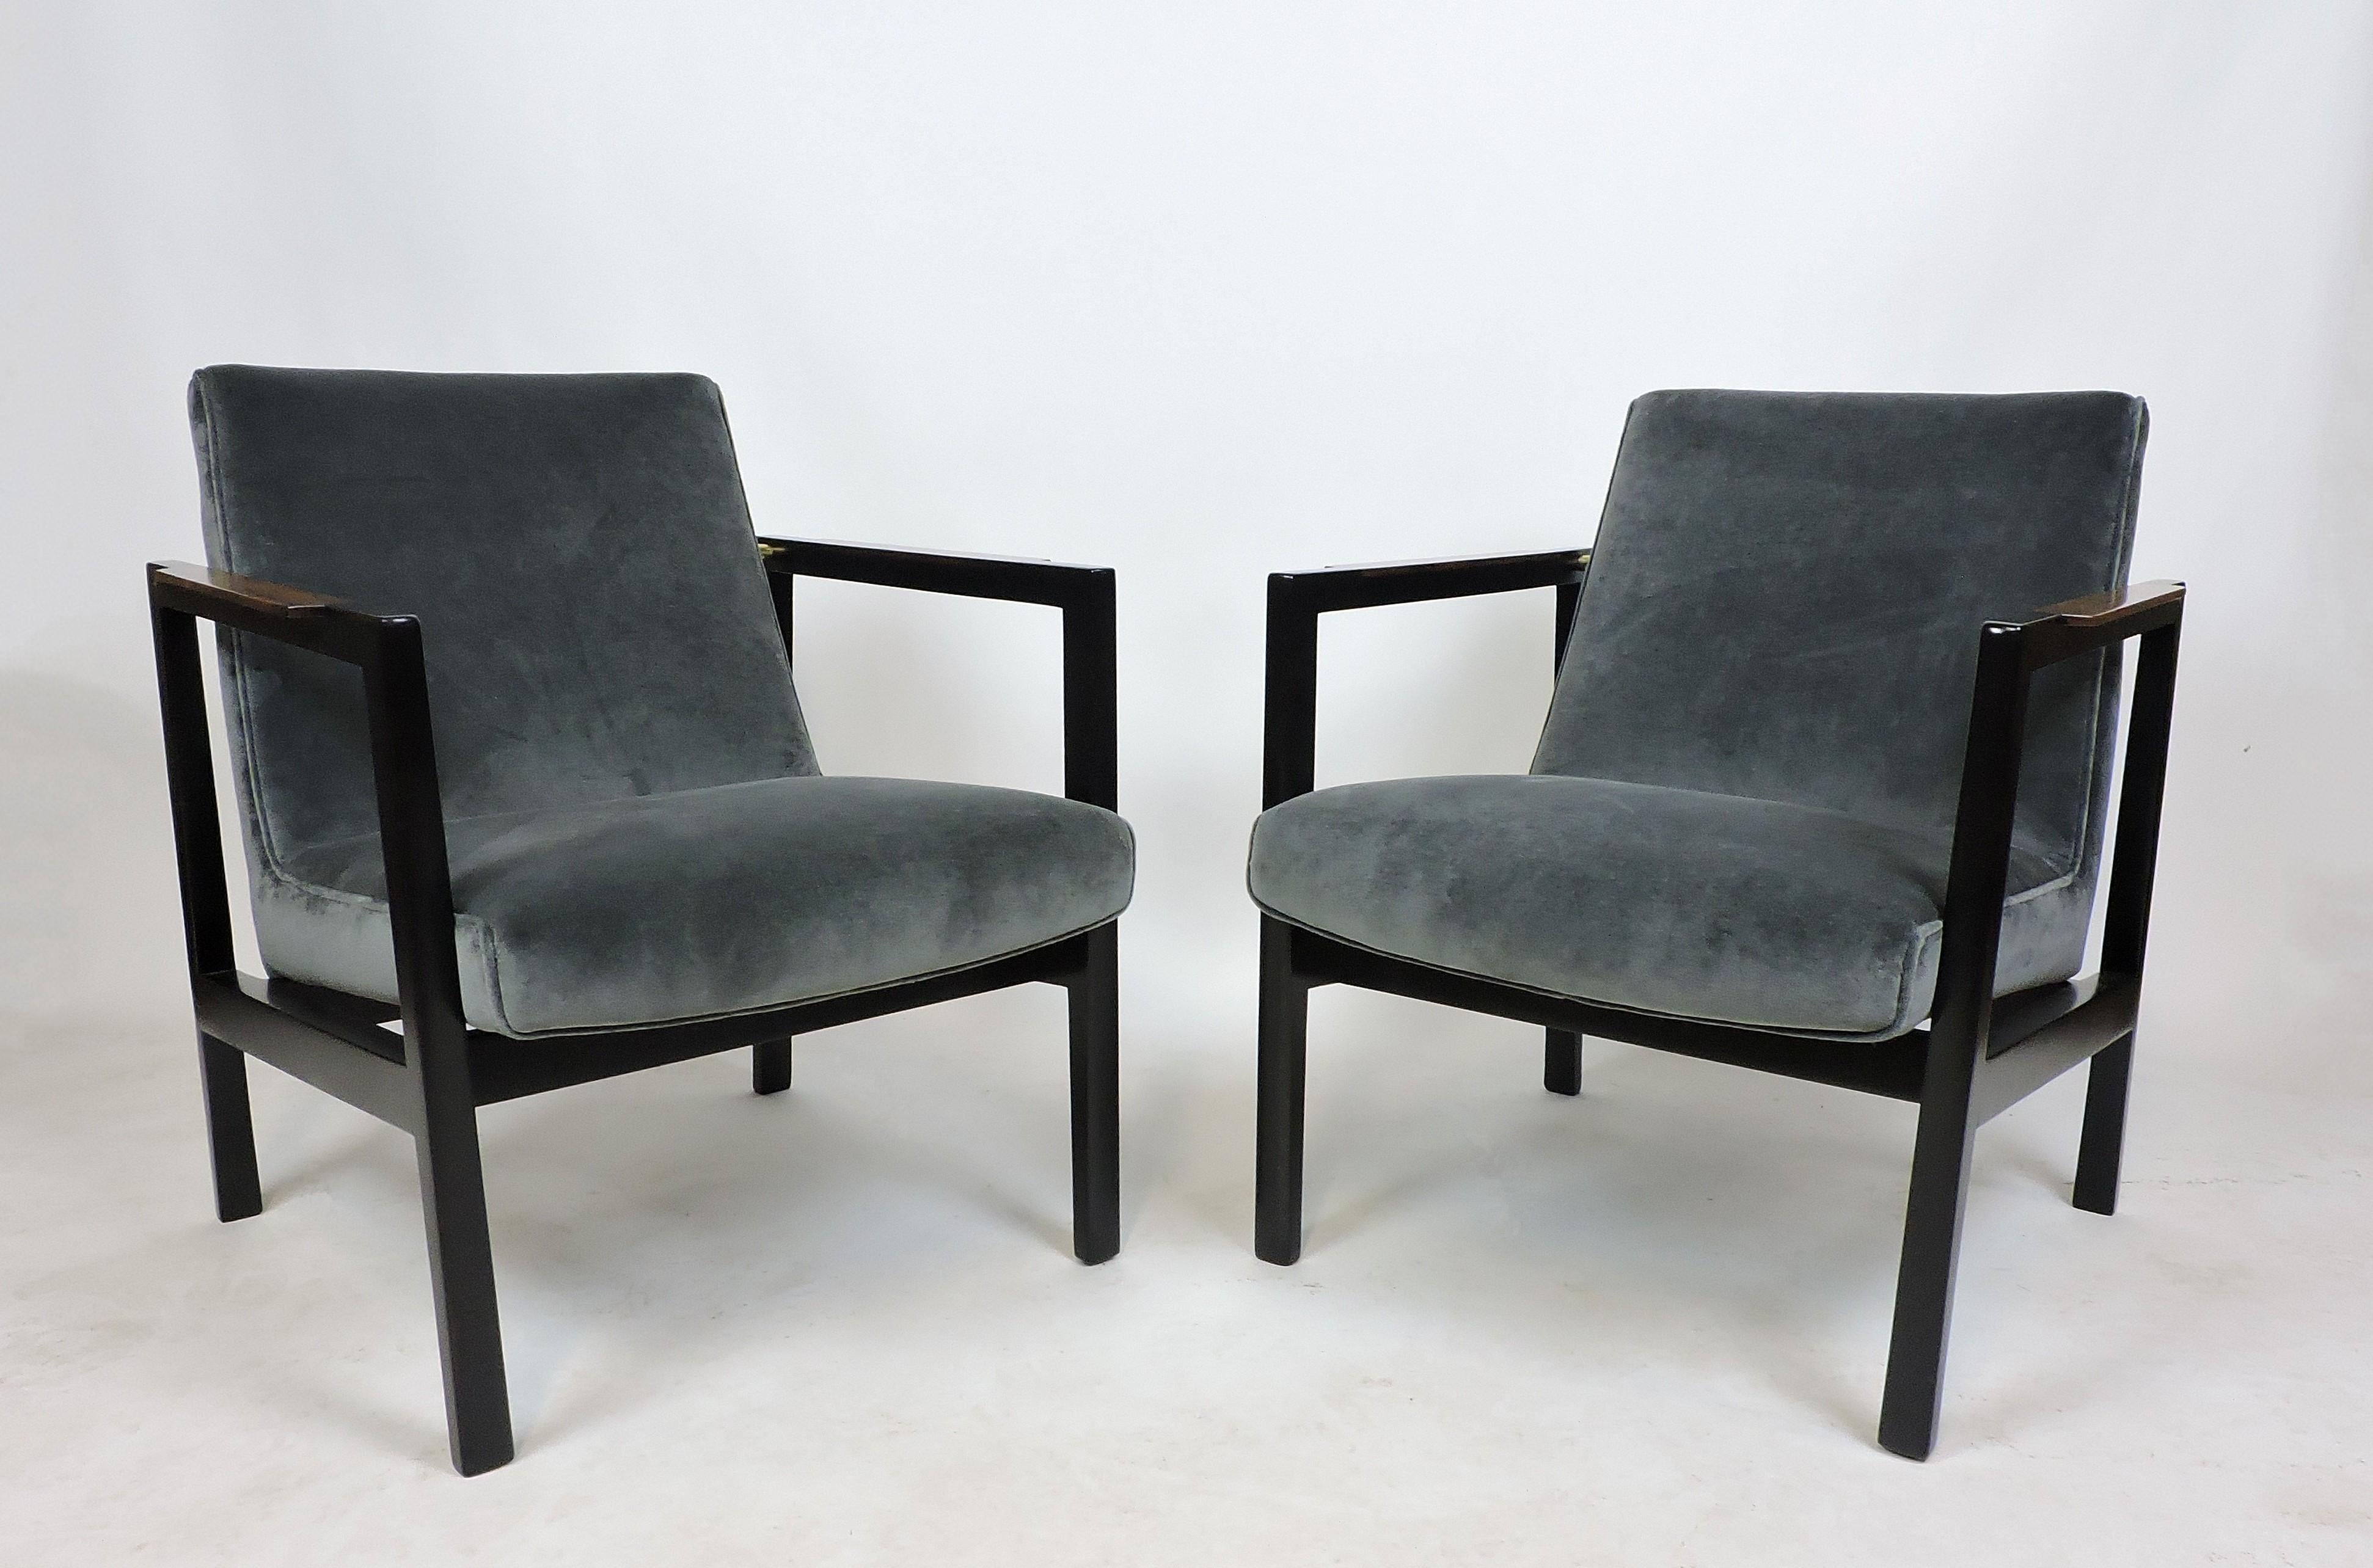 Elegant and sophisticated pair of open arm lounge chairs designed by Edward Wormley and manufactured by Dunbar. These clean lined chairs are made of mahogany and rosewood with brass accents and are newly reupholstered in a luxurious gray velvet.